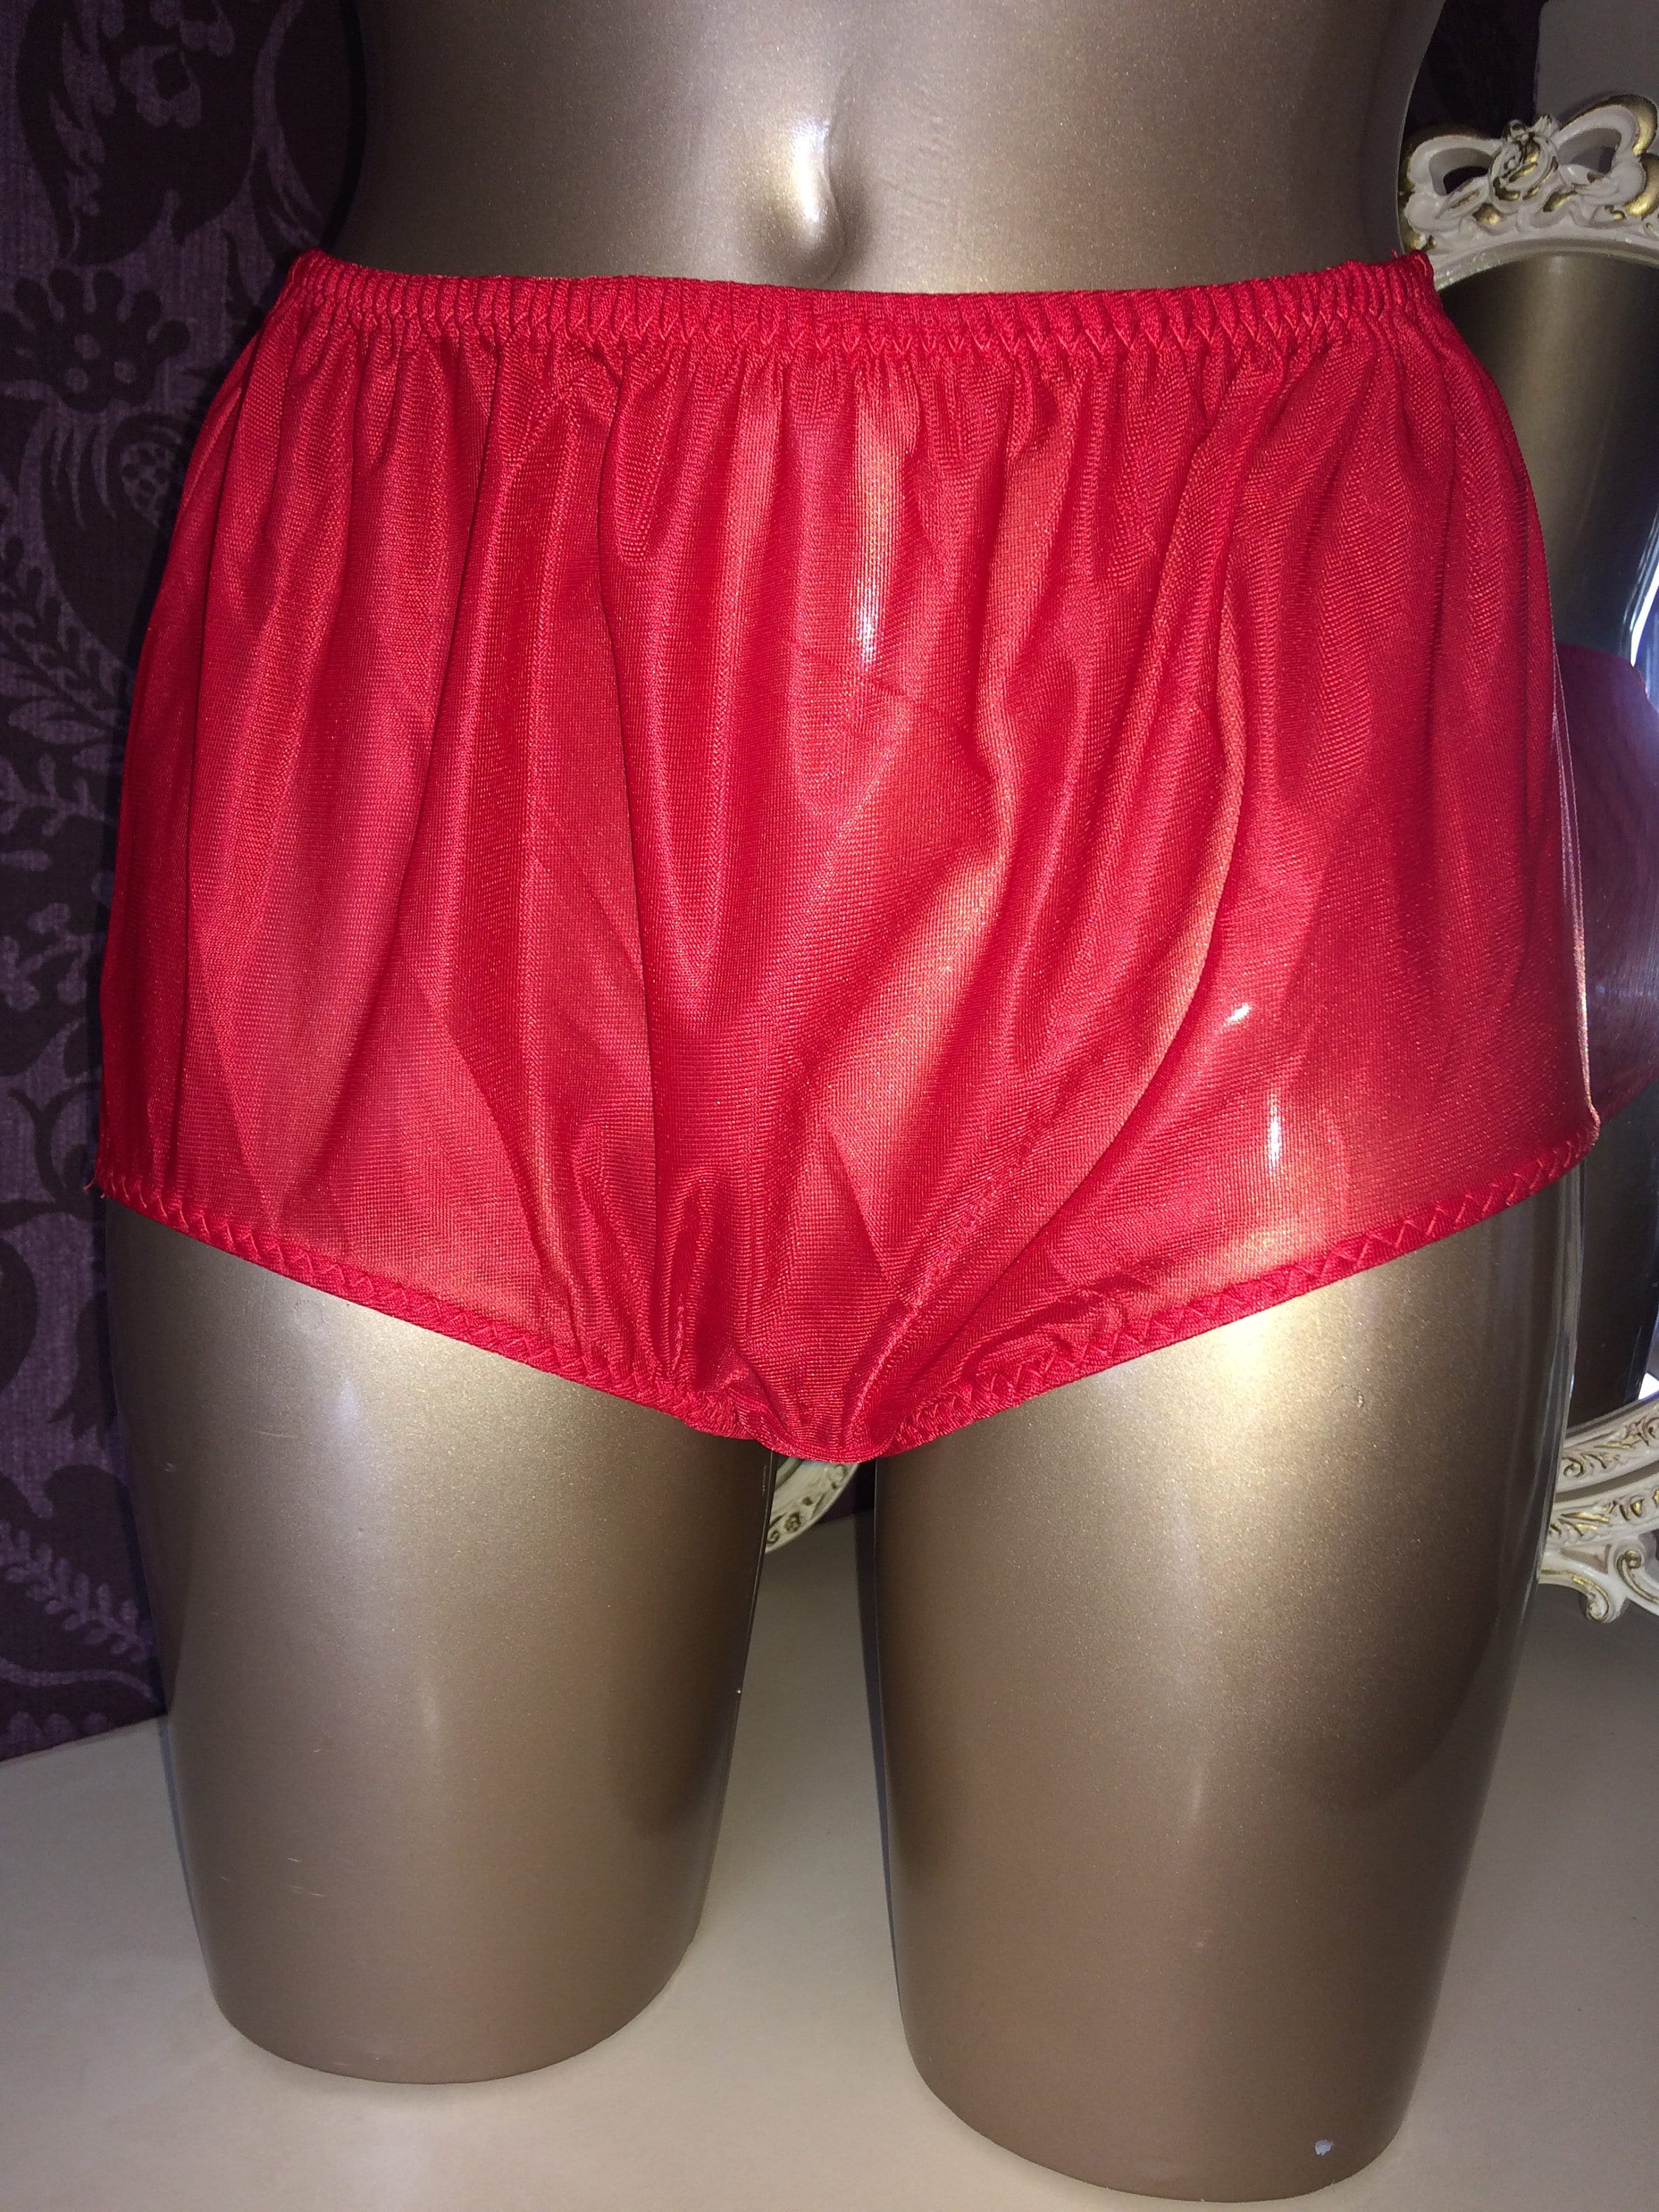 Vintage Style Knickers 70's 80's Granny Panties Knickers RED Semi Sheer  Slippery Size MEDIUM LARGE -  Denmark